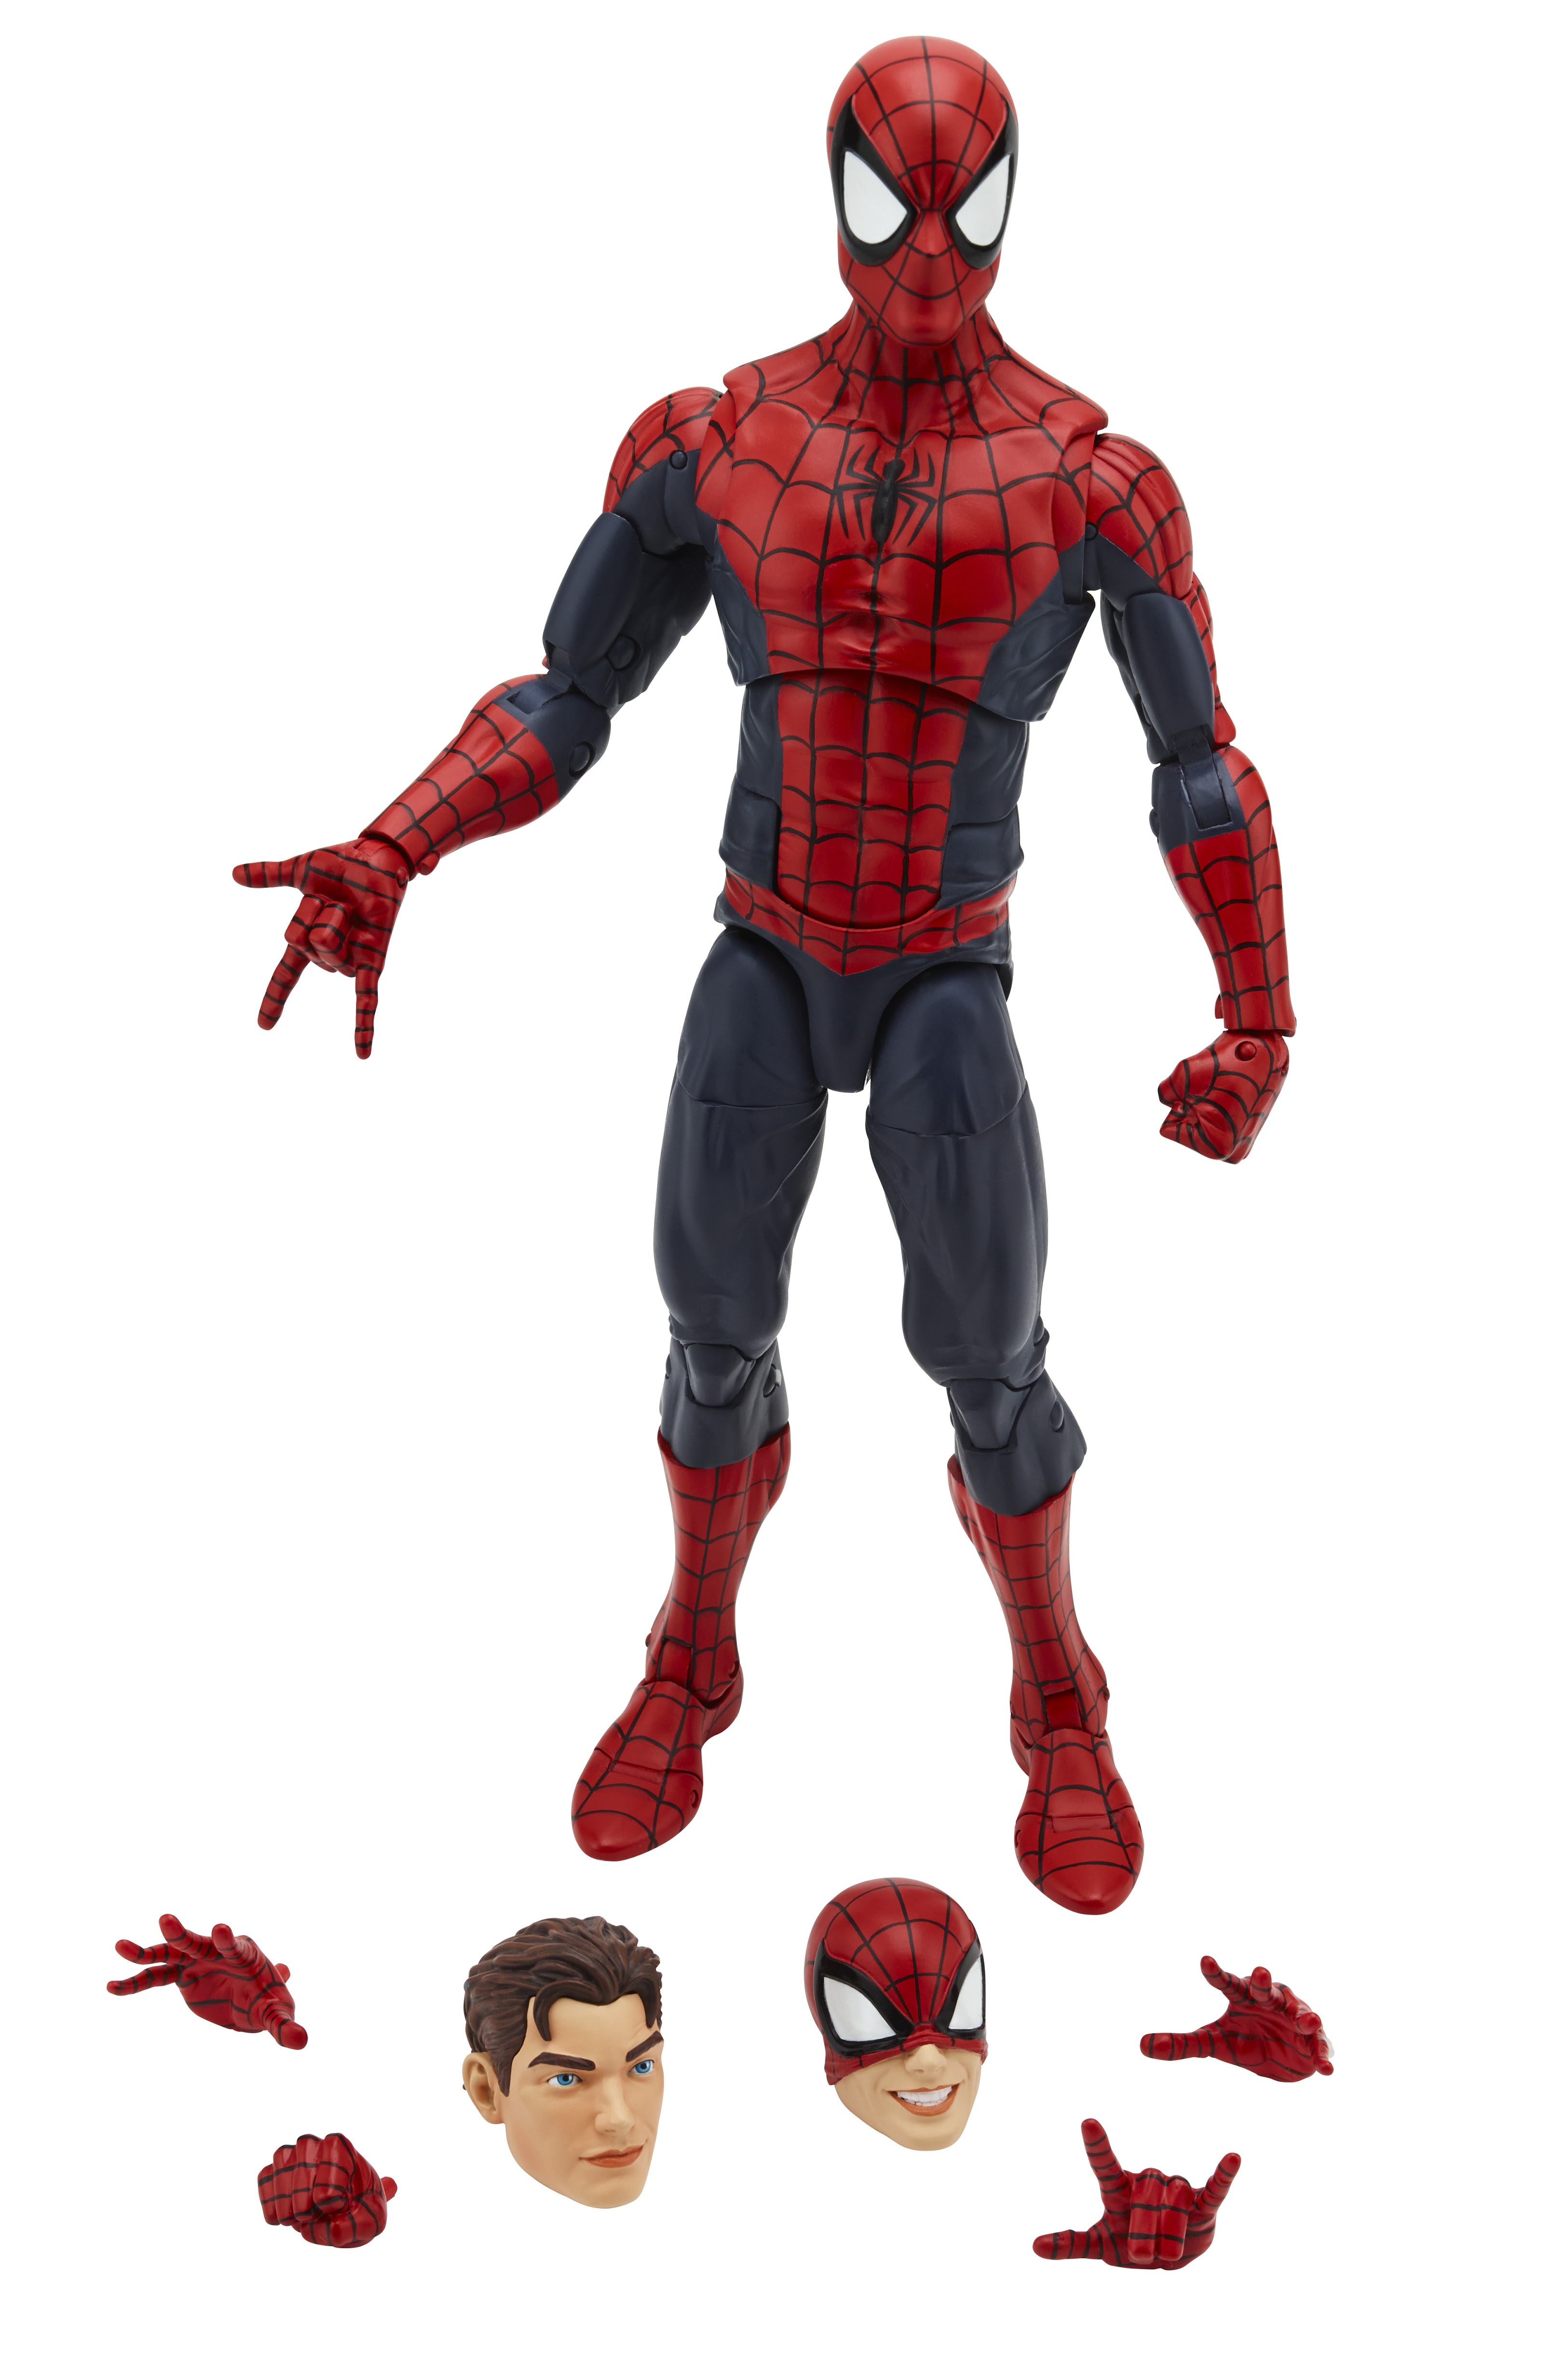 B7450AS00 Marvel Legends 12 Inch SpiderMan Large 300DPI Large Batch of Hasbro Marvel & Star Wars Figure Images From Toy Fair